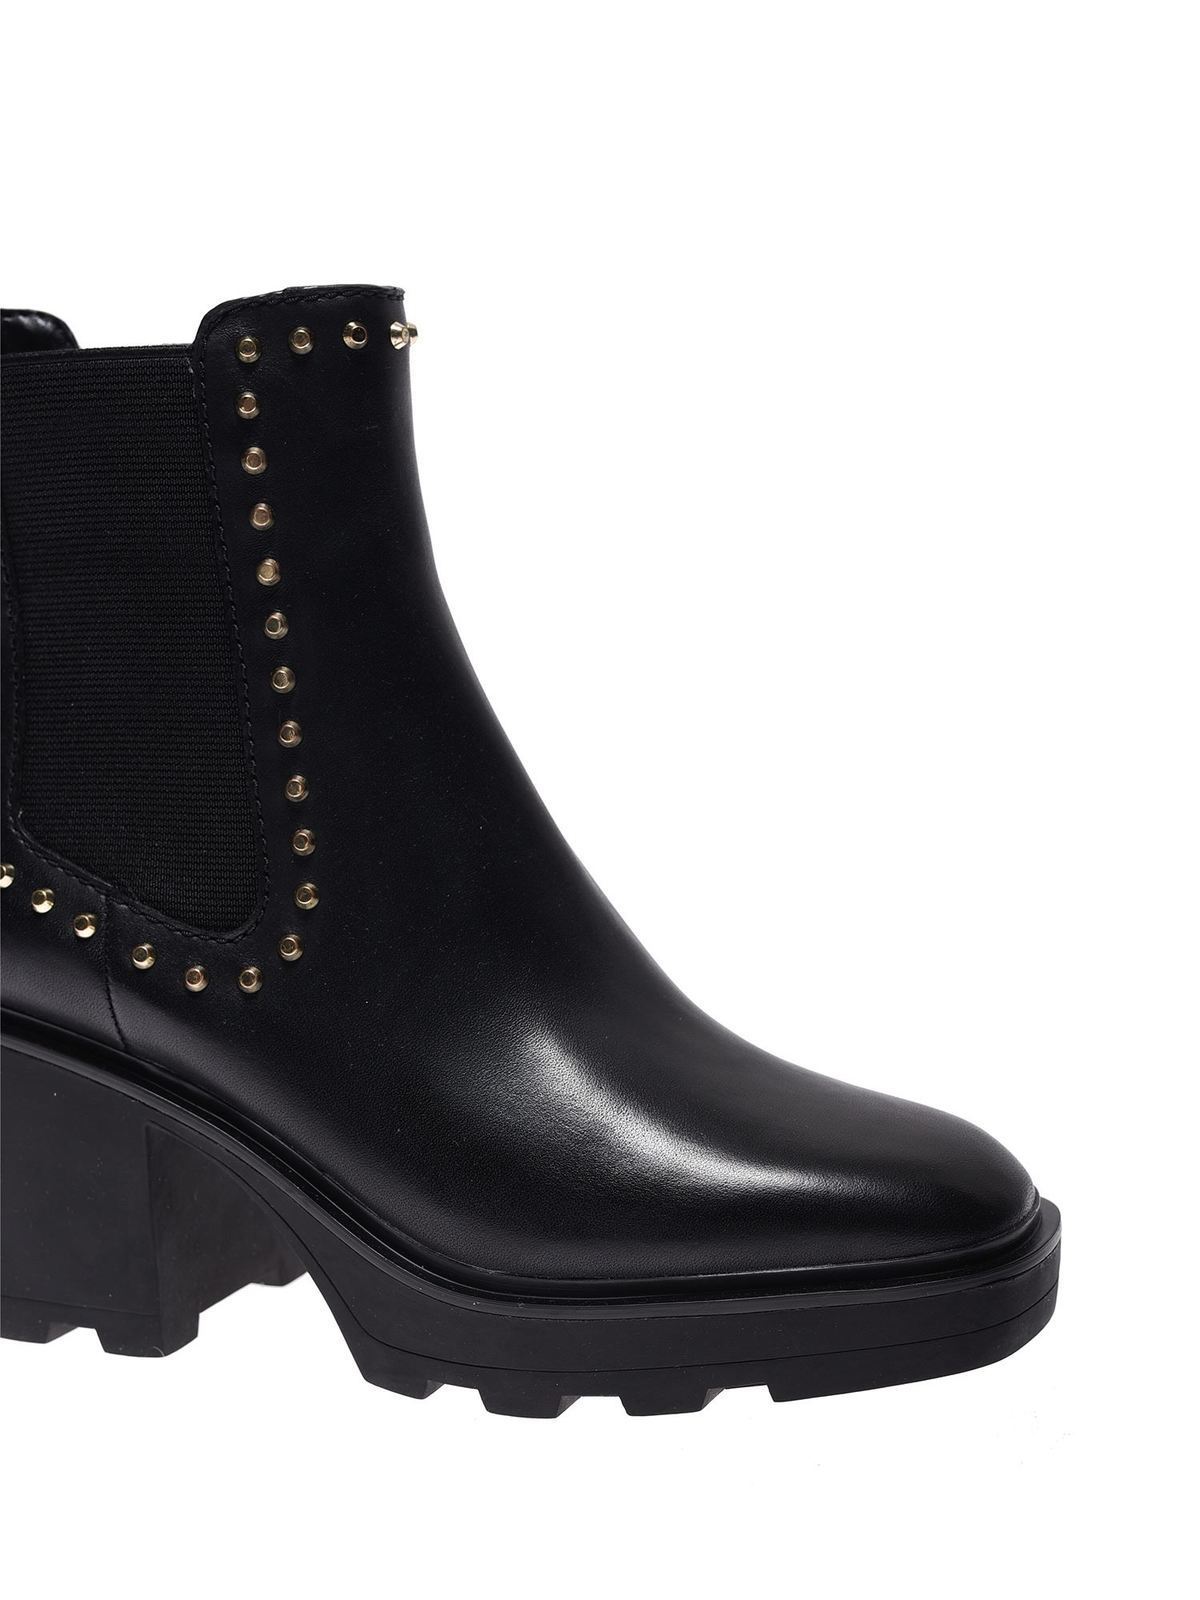 Ankle boots Michael Kors - Keisha Studs ankle boots in black - 40F1KEME7L007